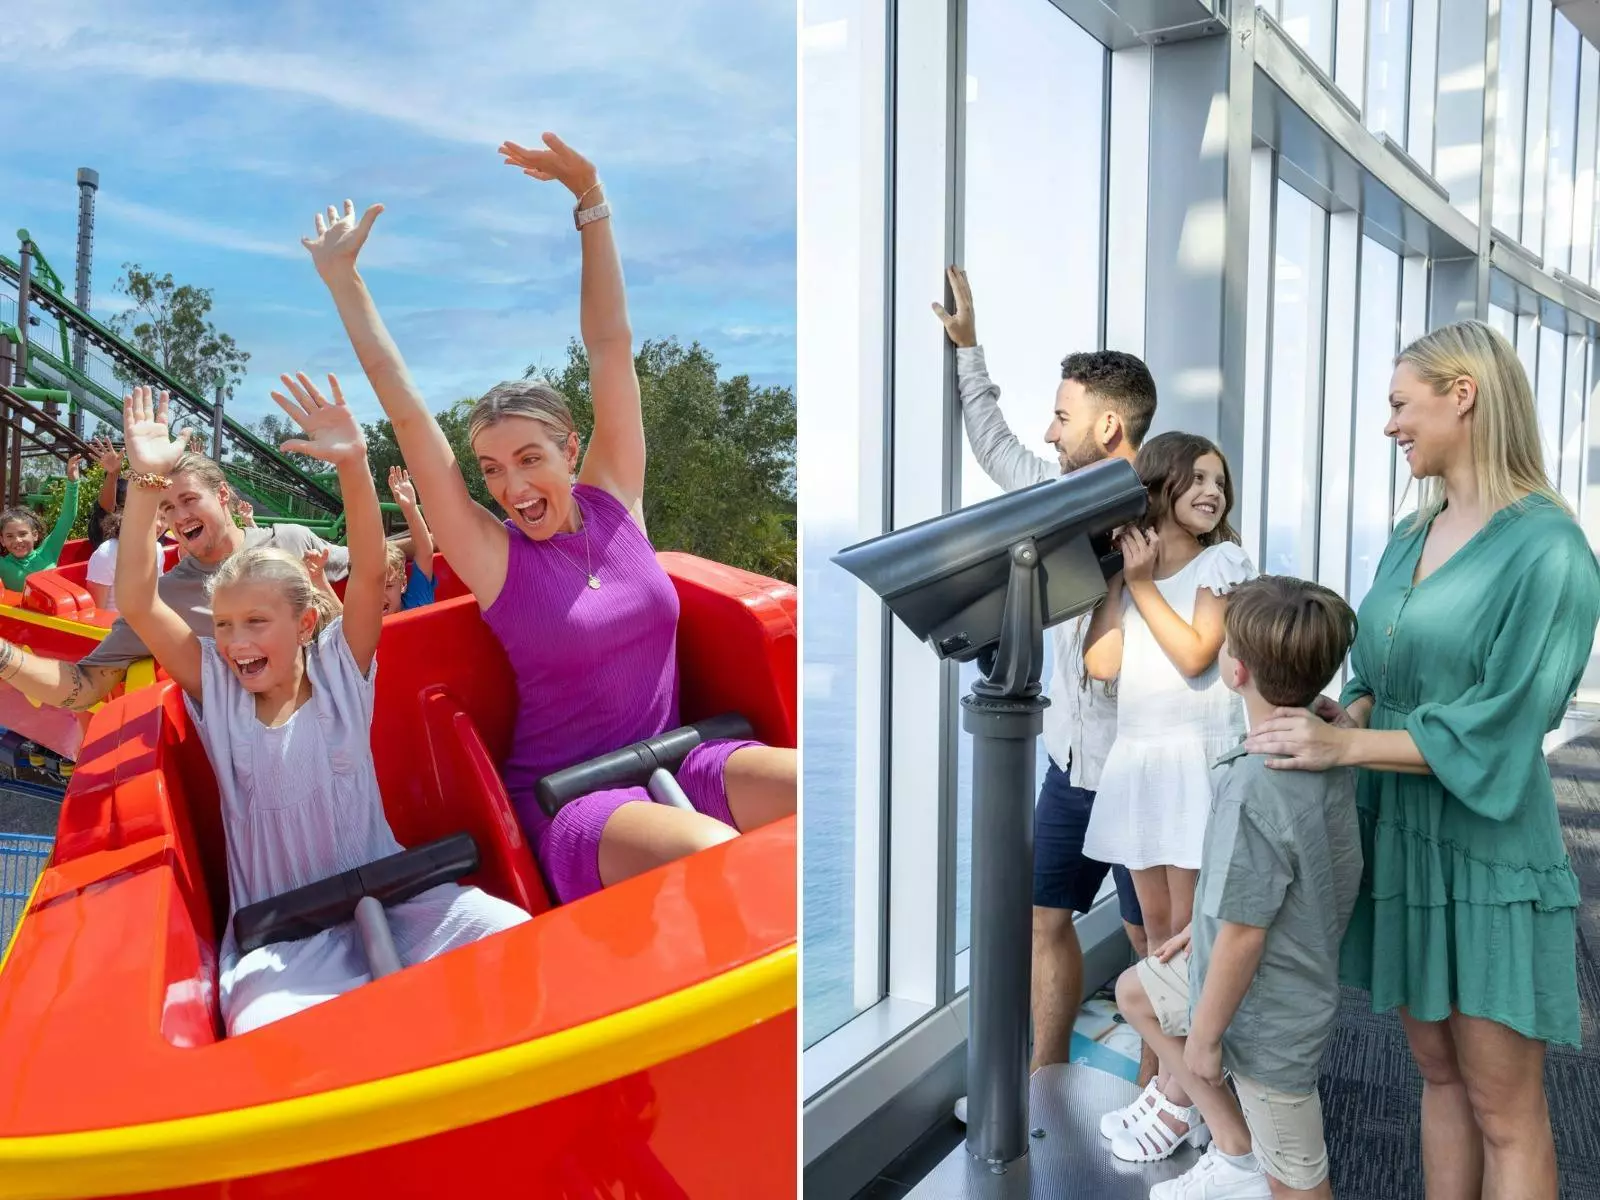 2-day Dreamworld + SkyPoint entry for $129 ($10 saving)